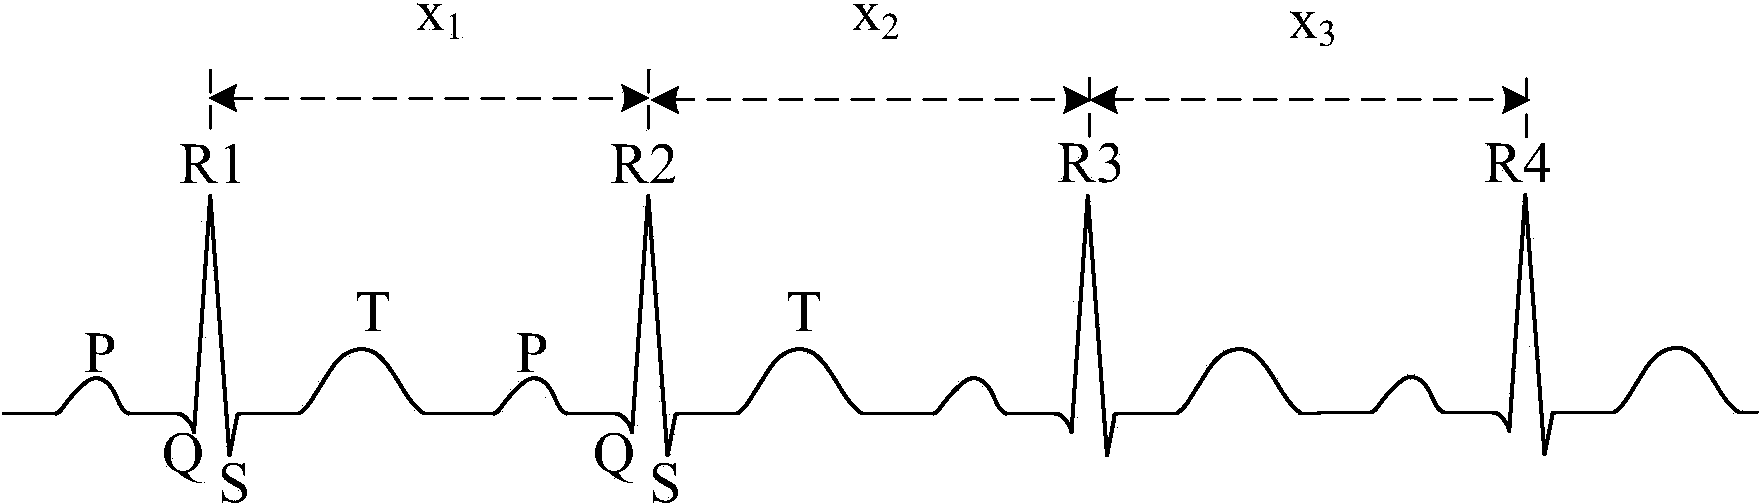 Method and device for heart rate analysis based on electrocardiogram